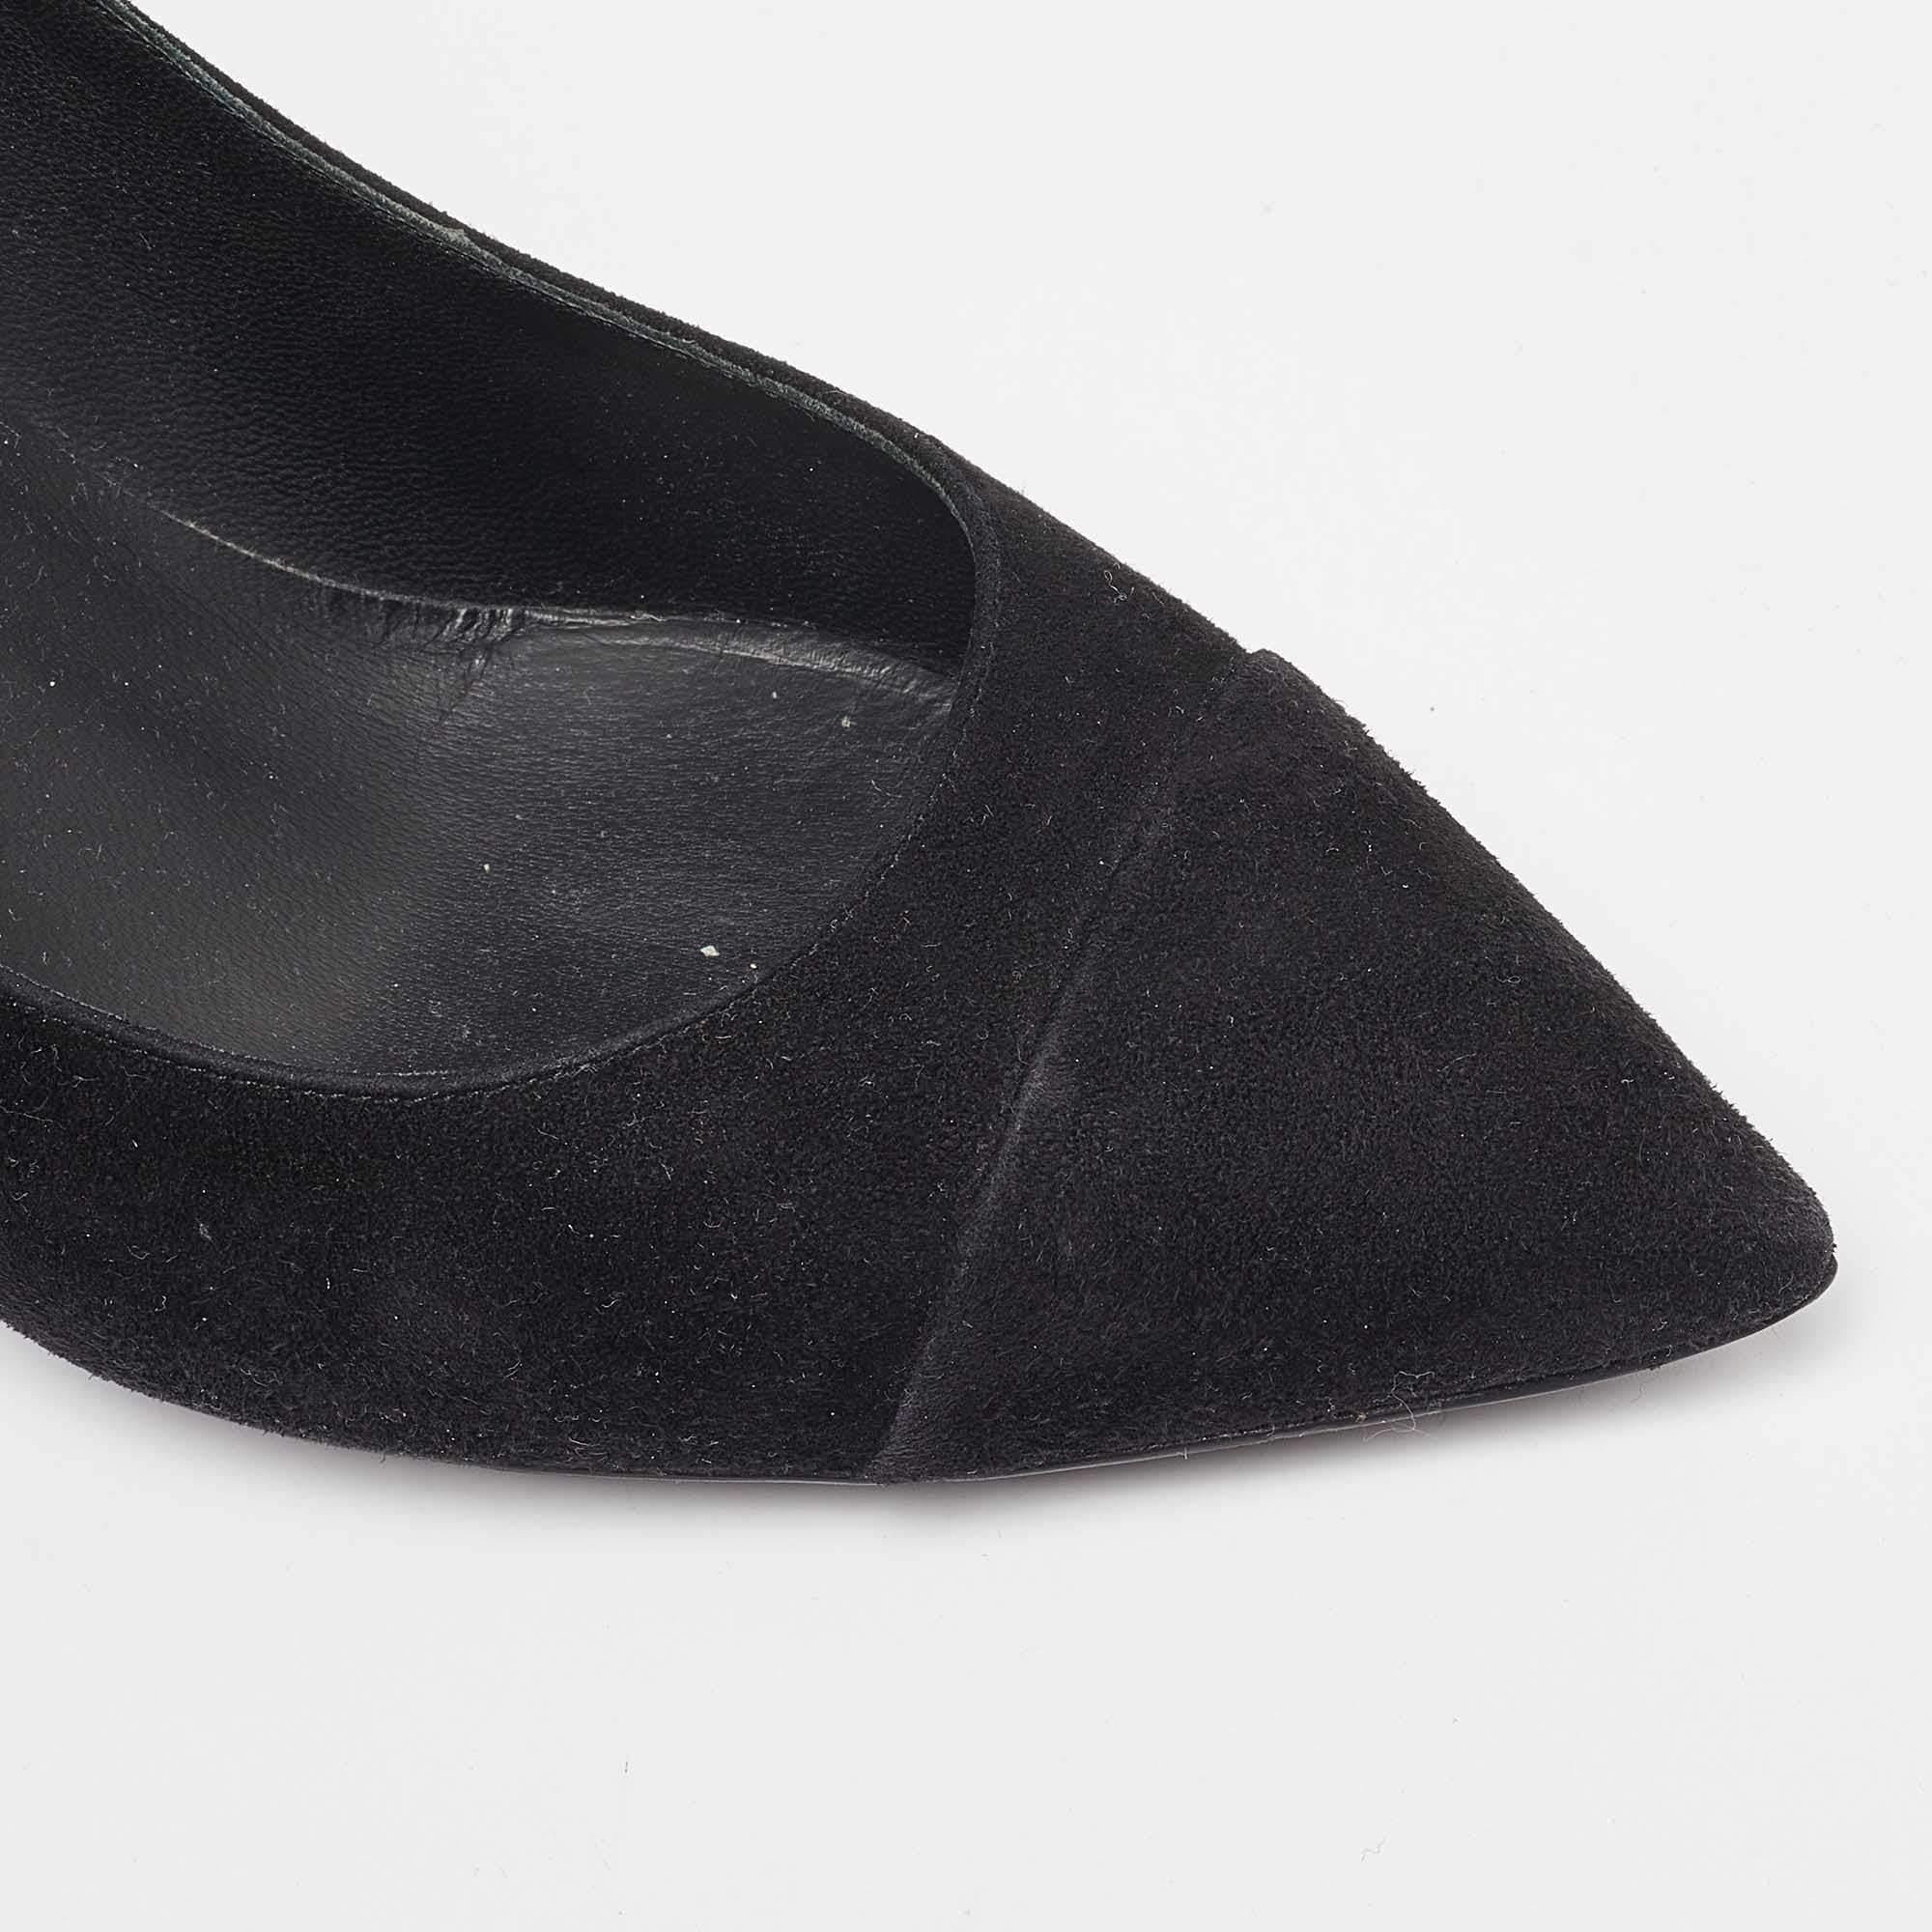 Chanel Black Suede Cap Toe Pointed Pumps Size 37.5 For Sale 3